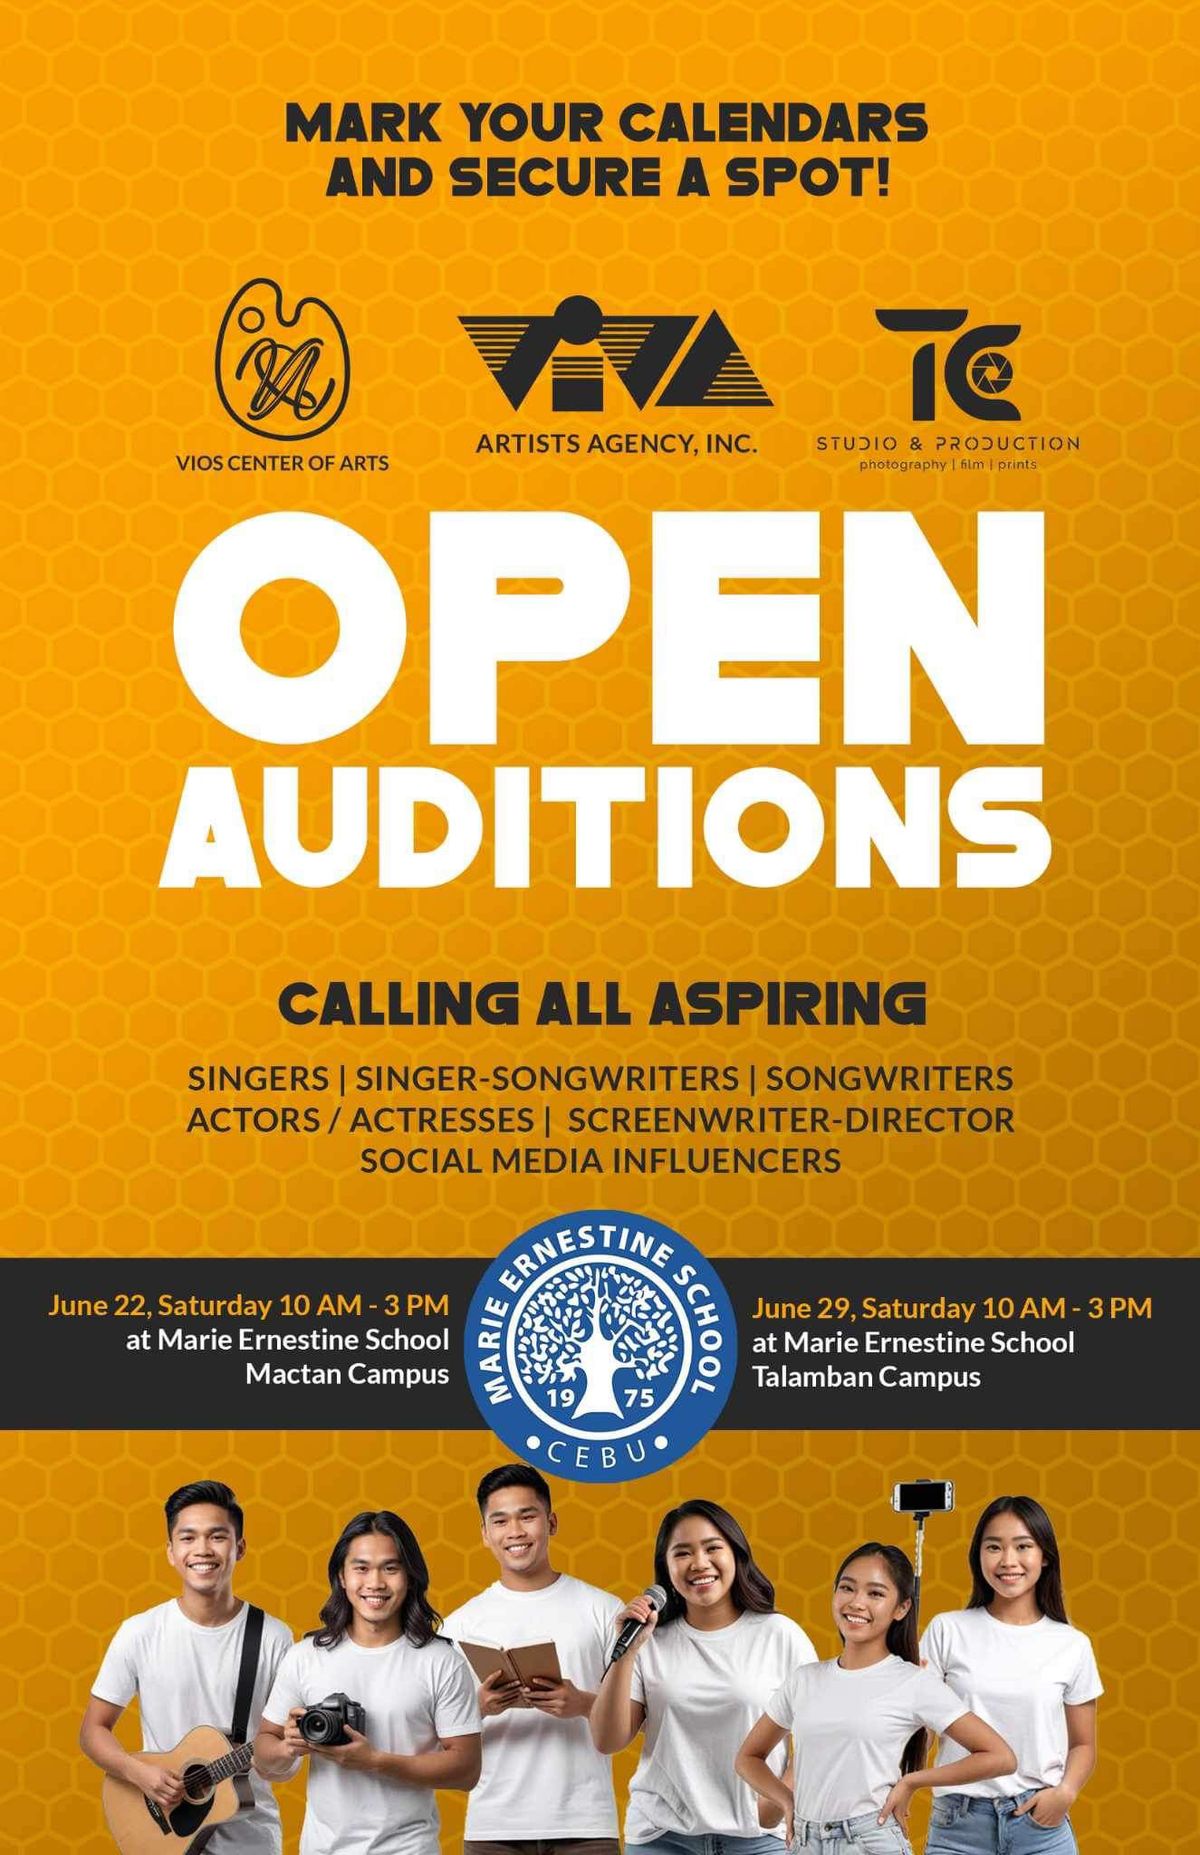 VIVA Artists Agency, Inc. Open Auditions